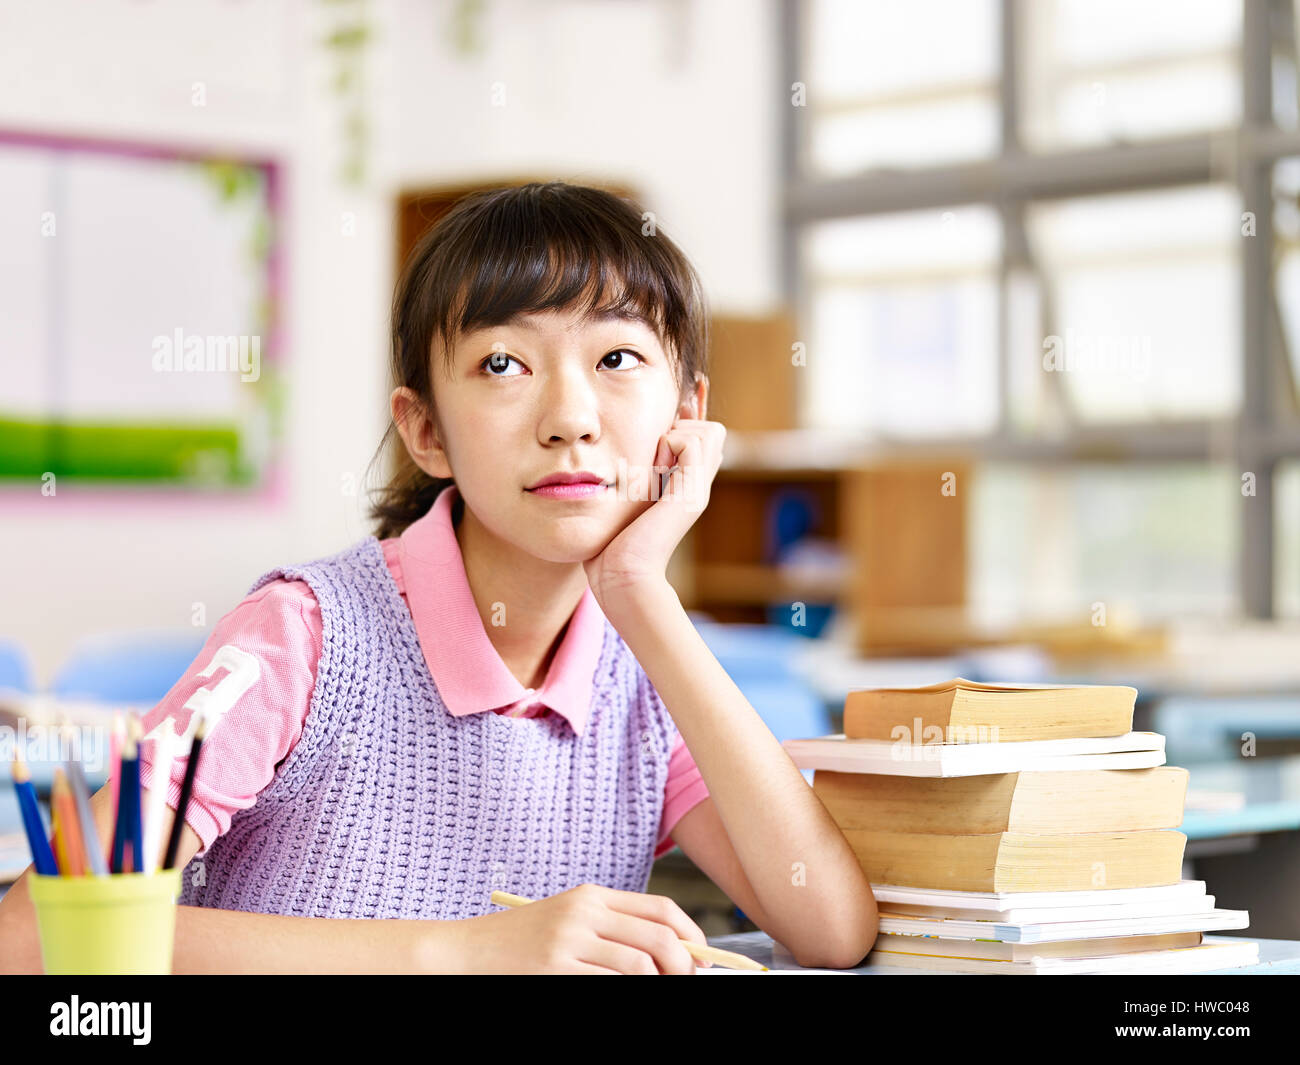 asian elementary schoolgirl sitting at desk looking up thinking in classroom. Stock Photo